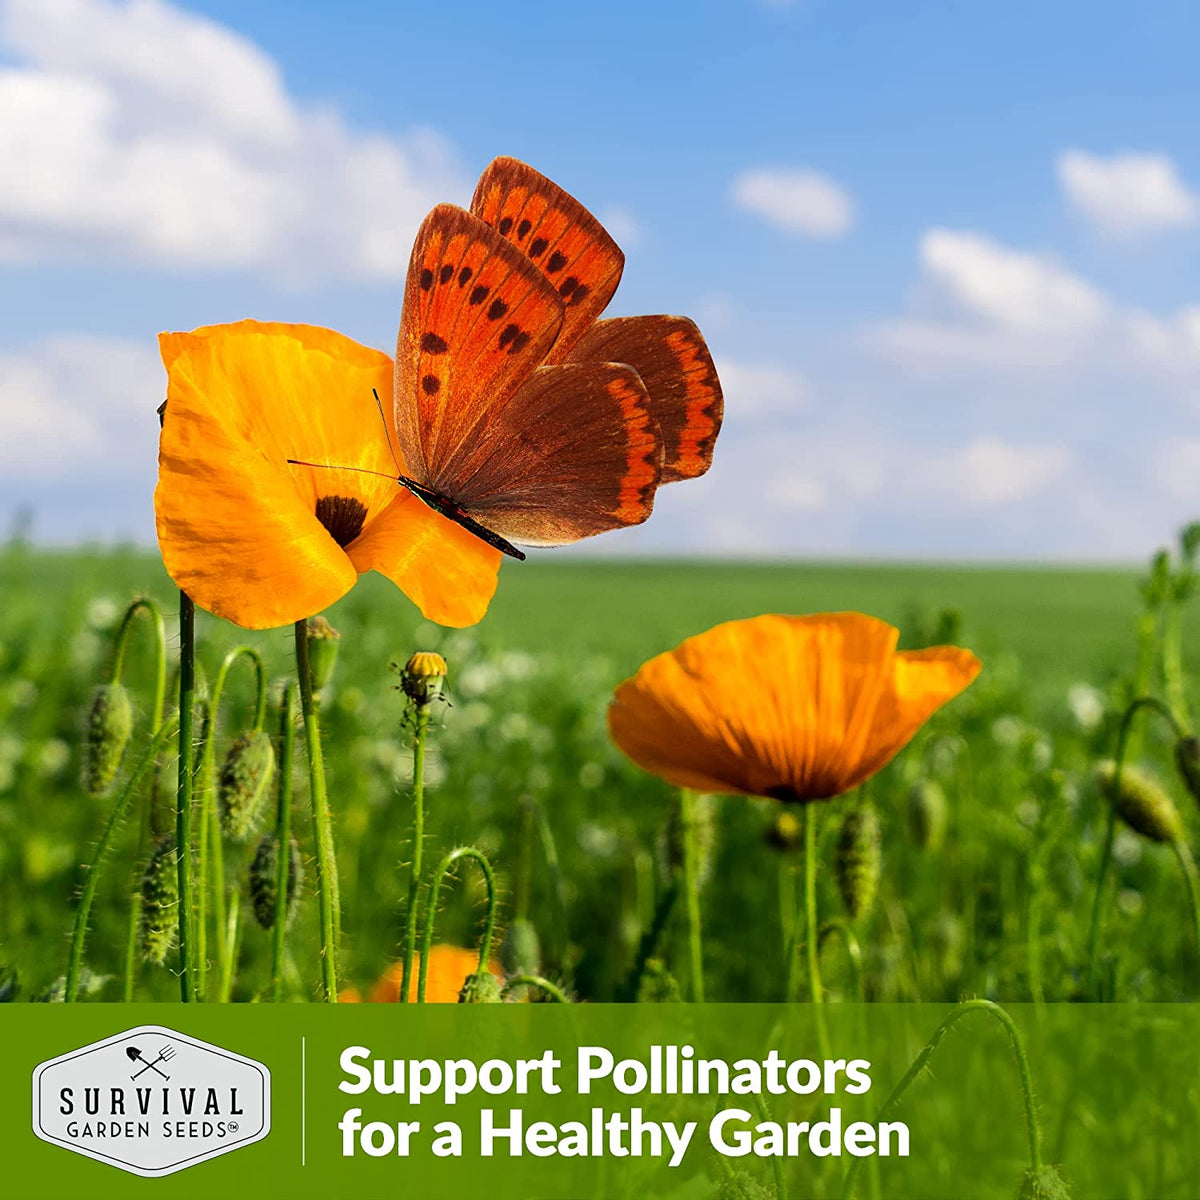 California Poppies support pollinators for a healthy garden